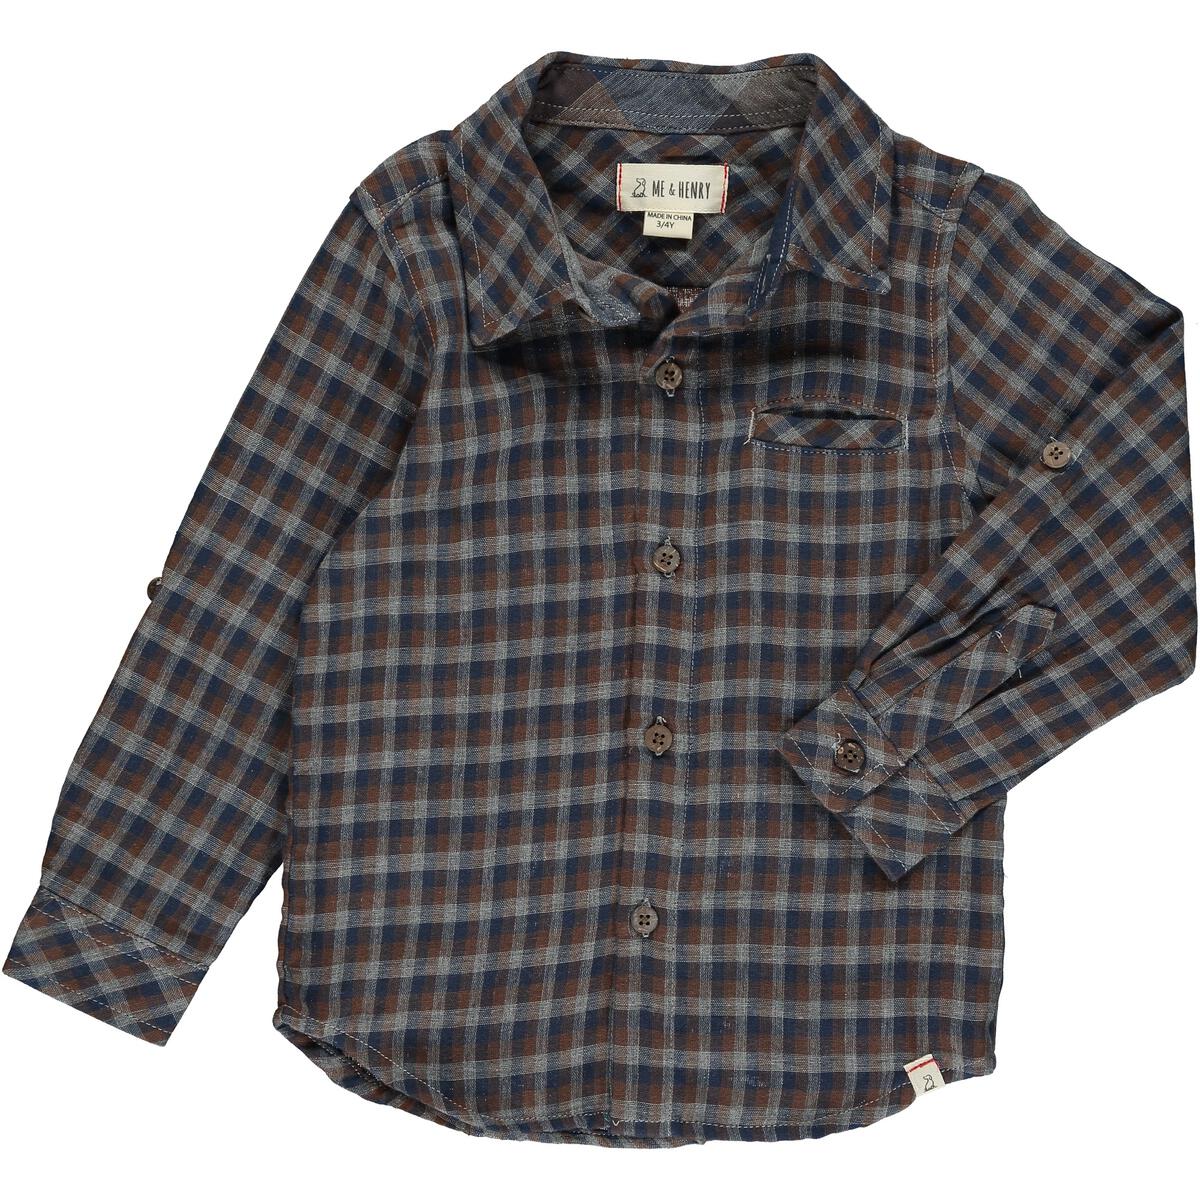 navy/brown atwood gold plaid woven shirt